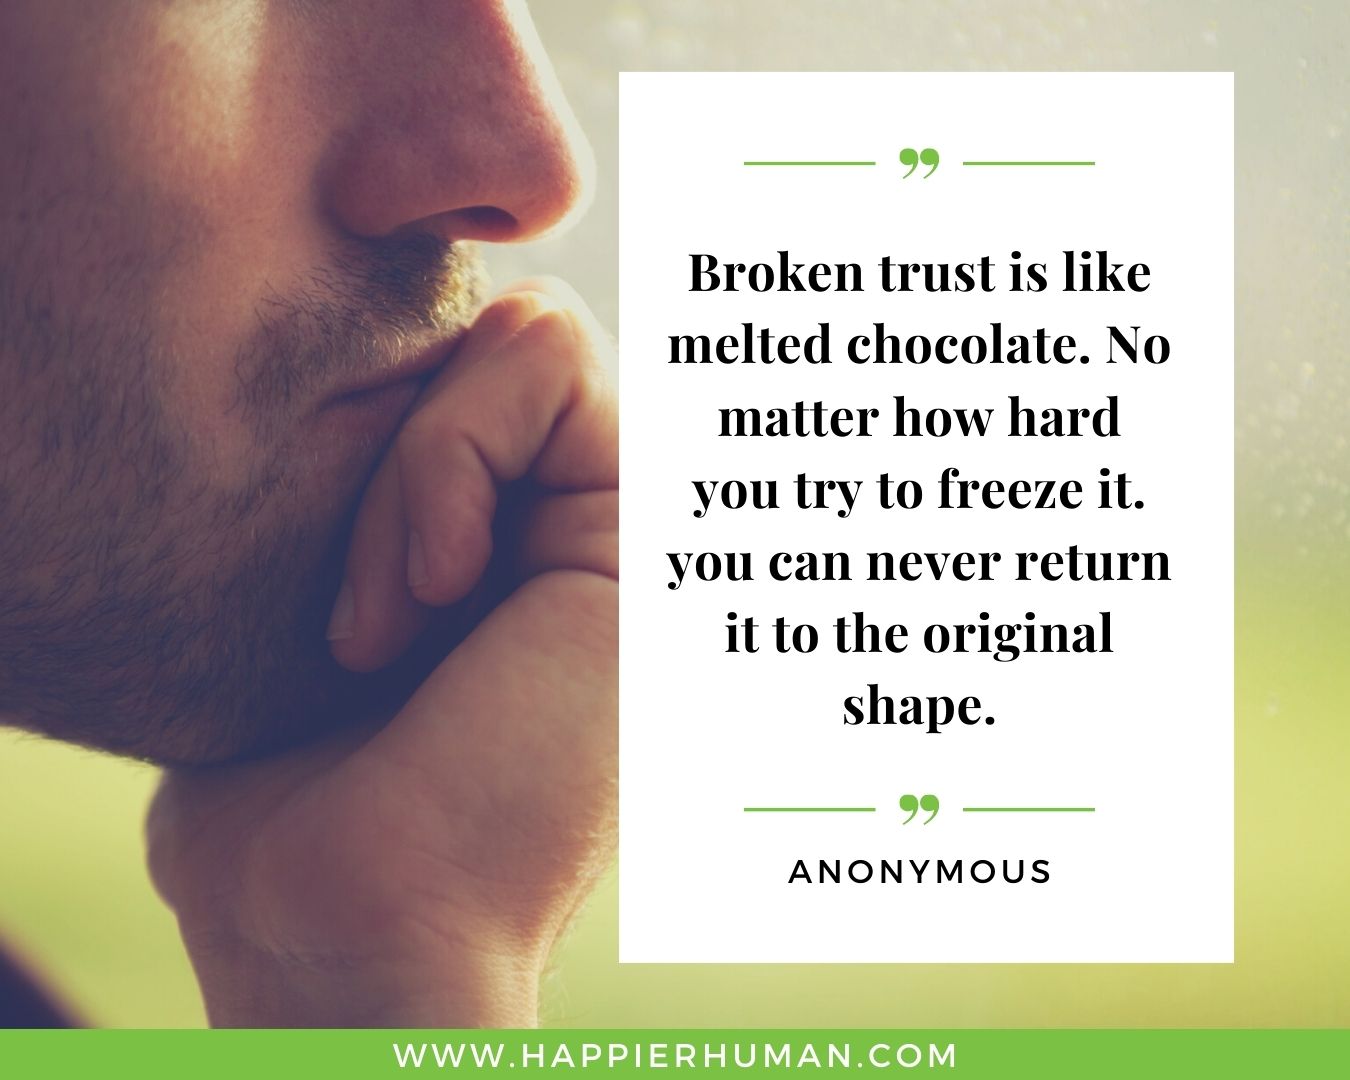 Broken Trust Quotes - “Broken trust is like melted chocolate. No matter how hard you try to freeze it. you can never return it to the original shape.” - Anonymous